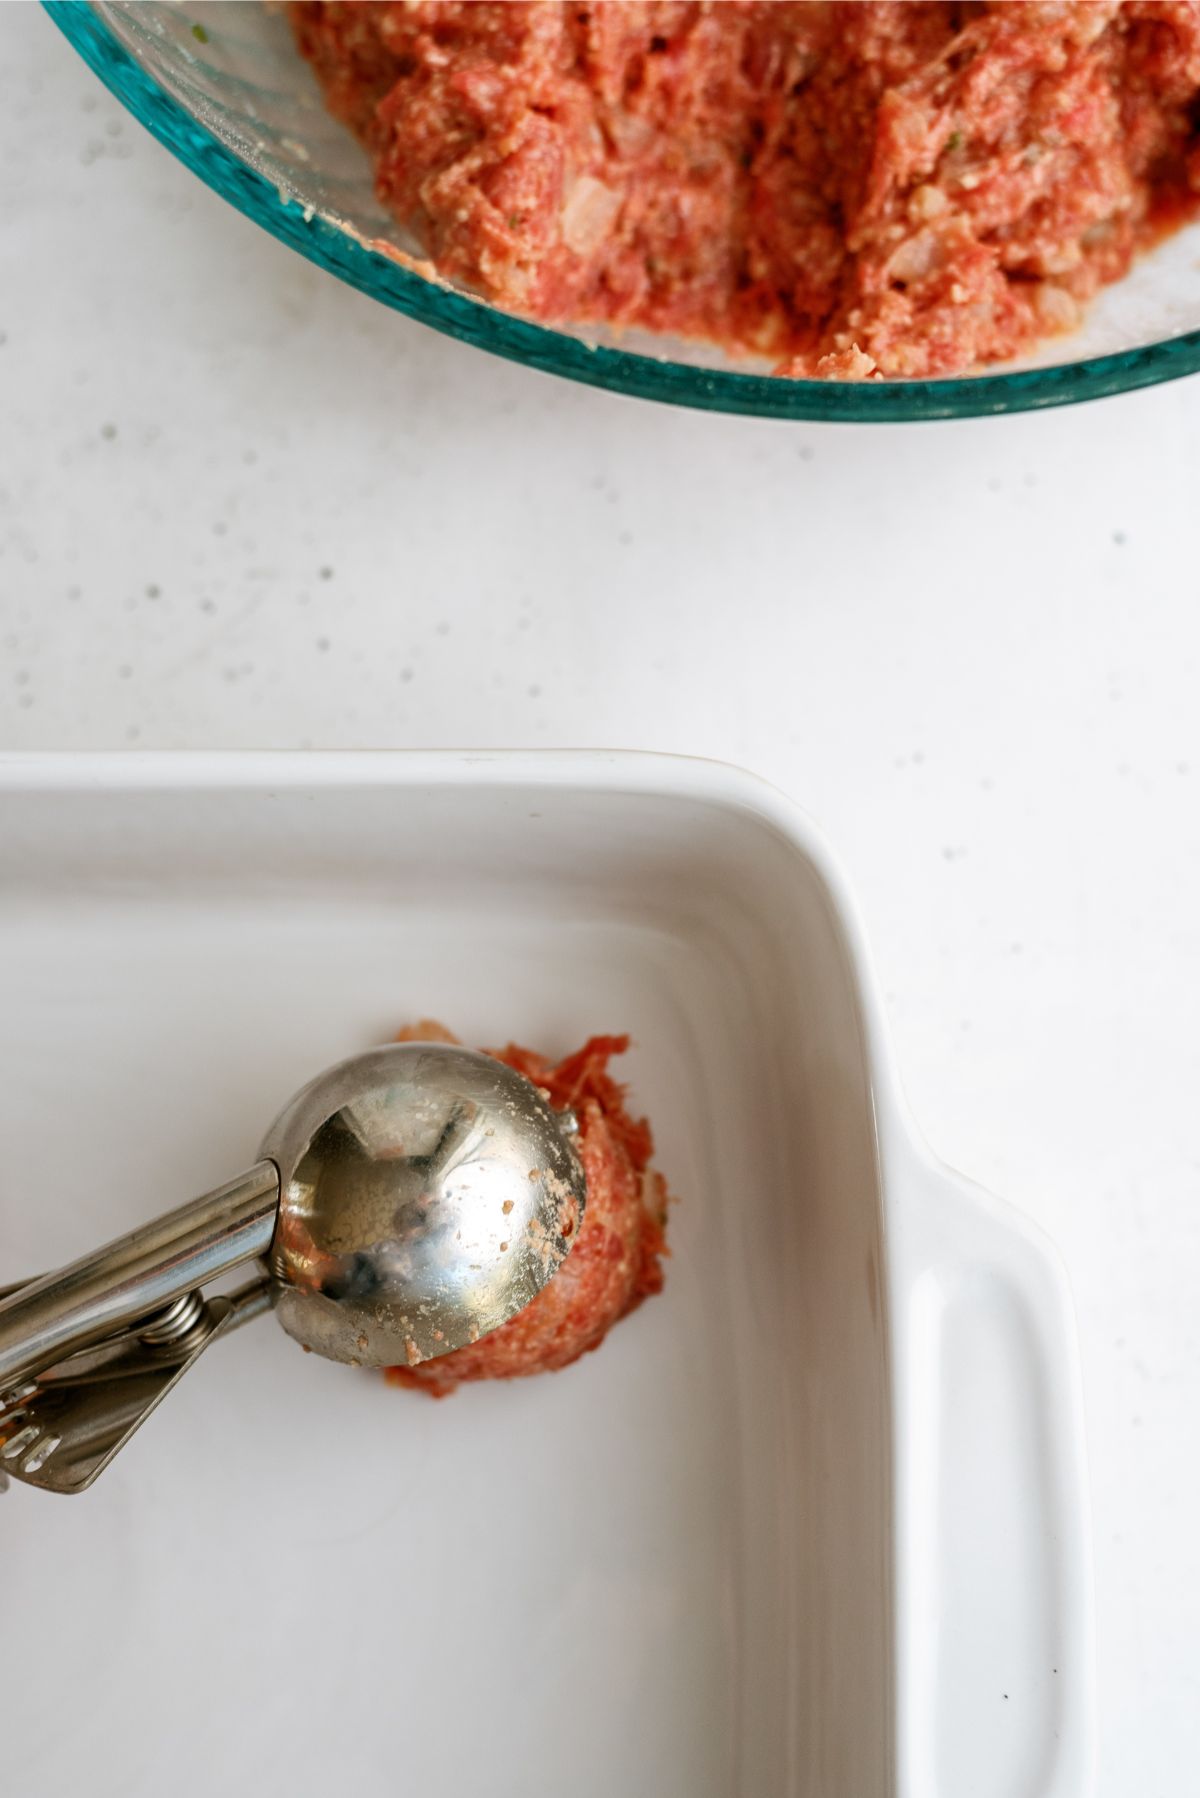 Scooping out meatballs with a cookie scoop